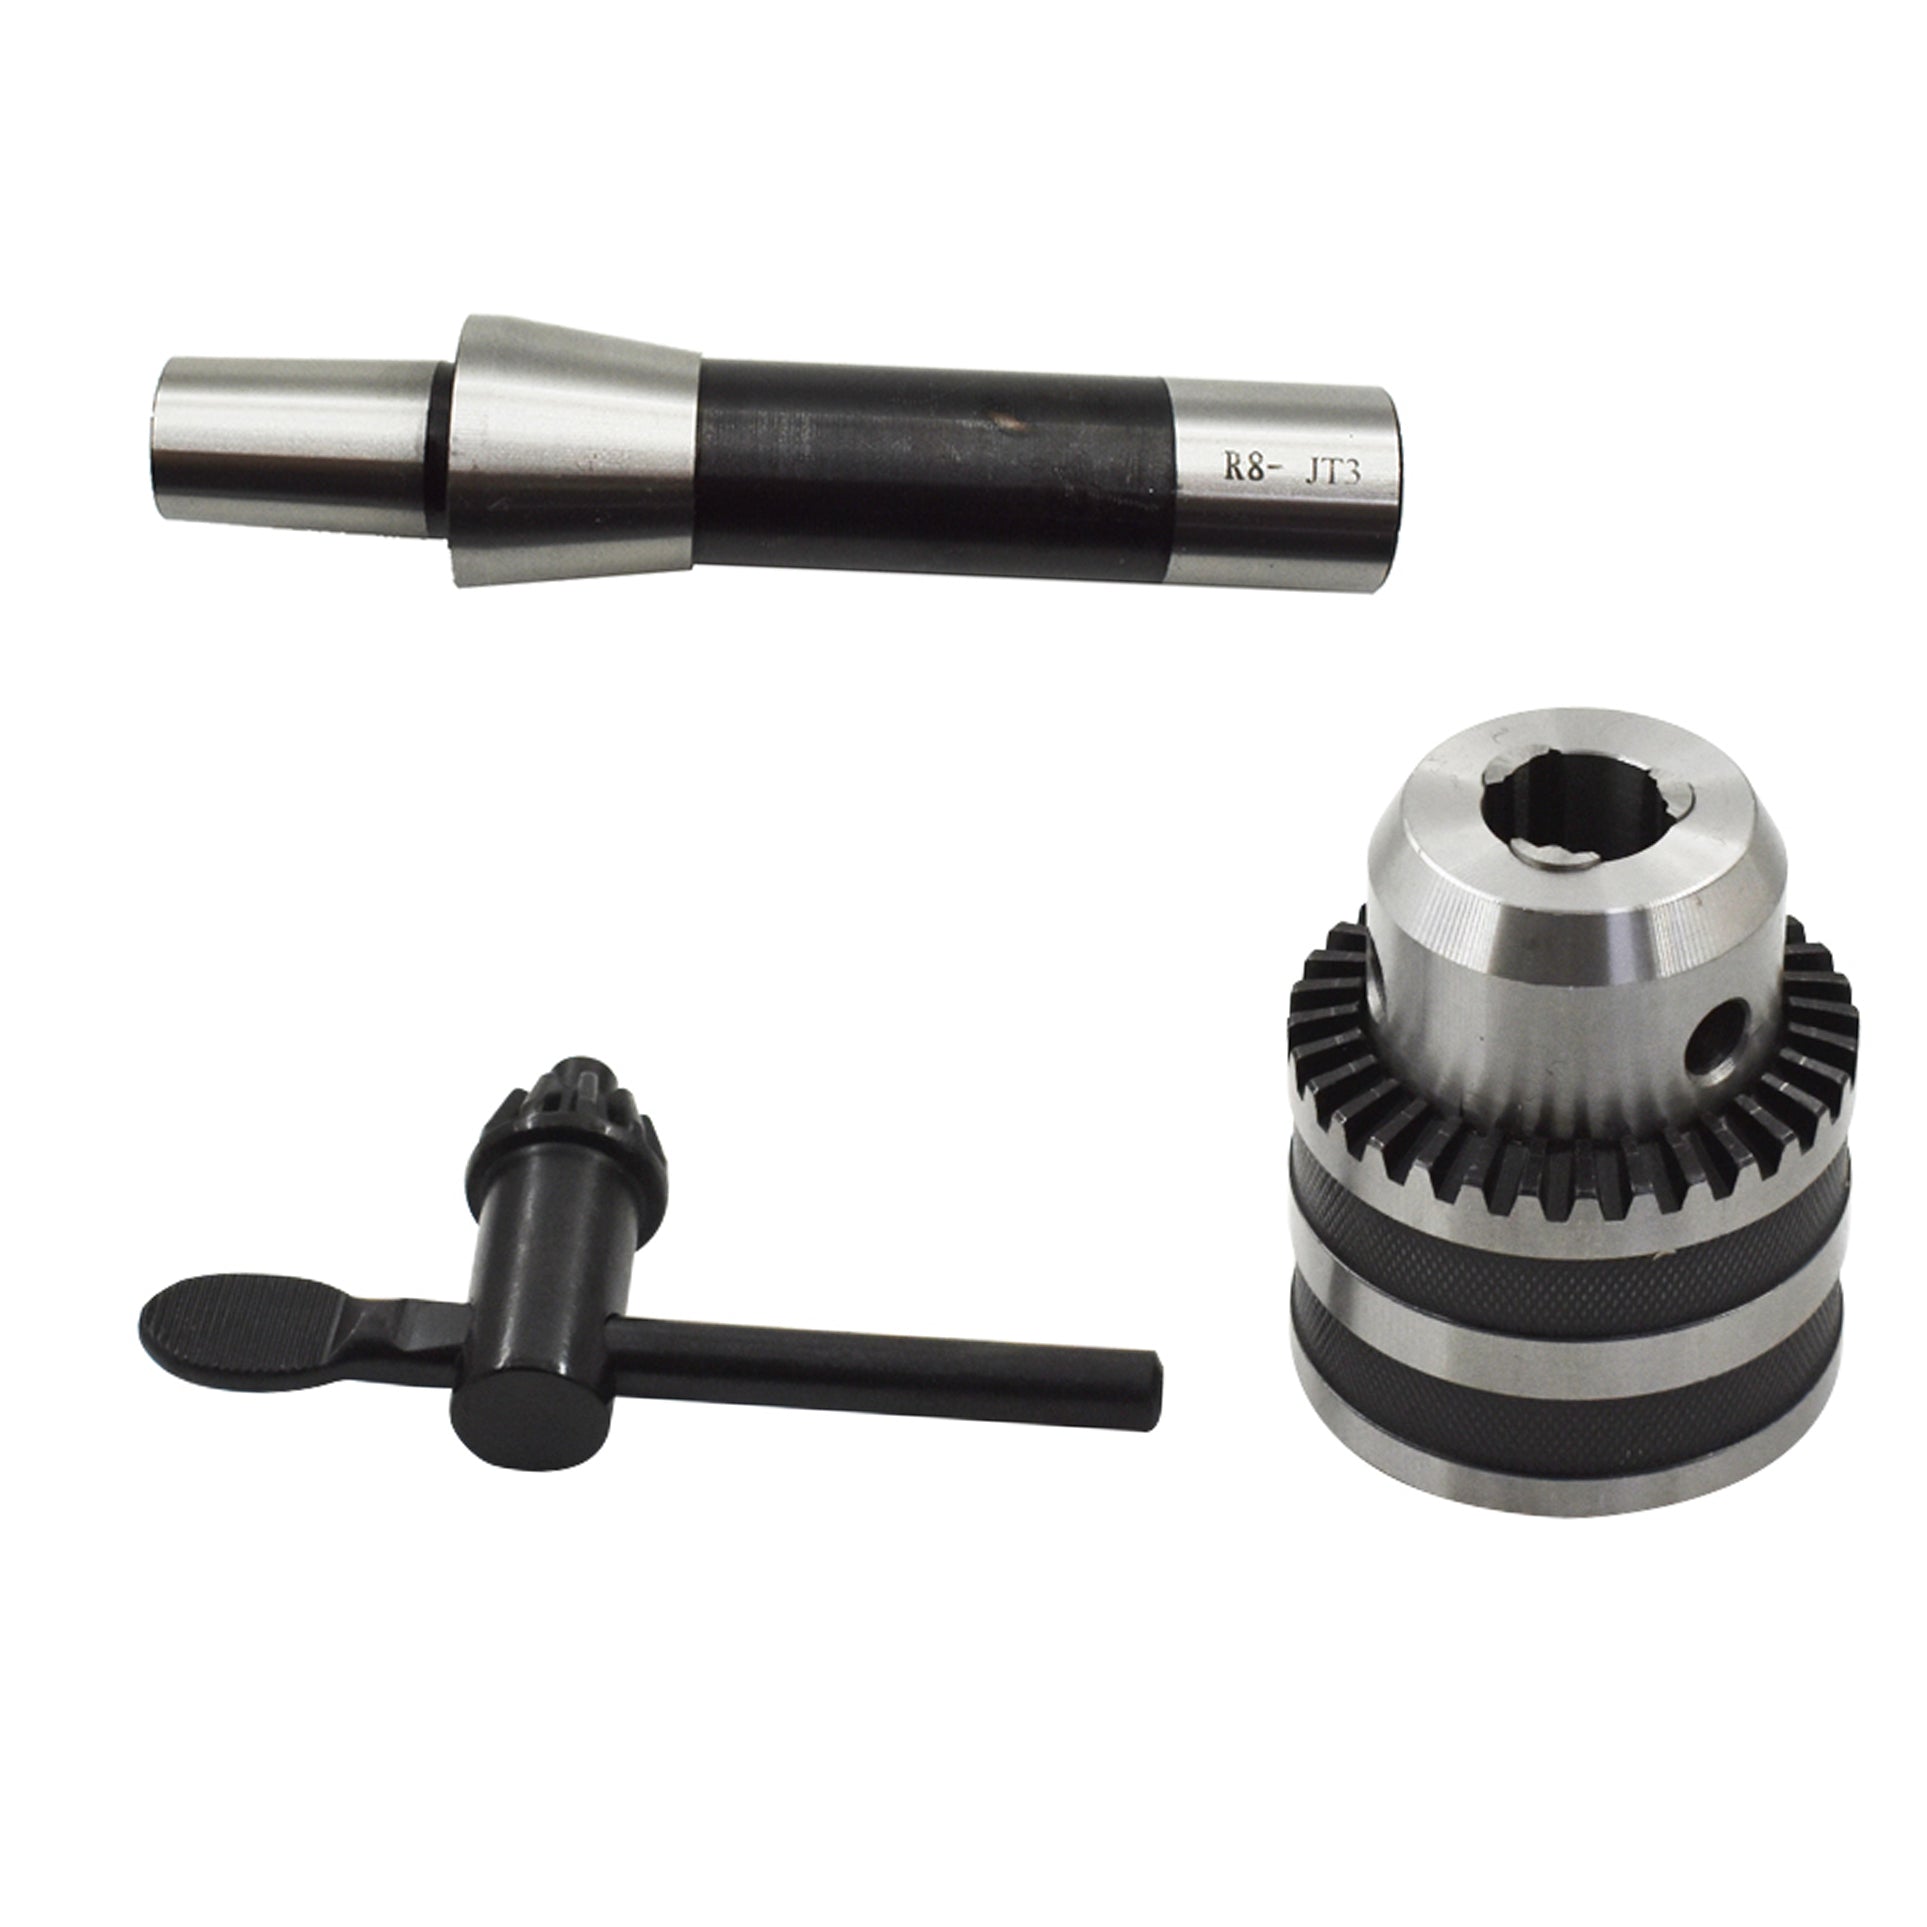 findmall R8 to 3JT Drill Chuck Arbor R8 Shank To Jacobs Taper JT3 Adapter FINDMALLPARTS